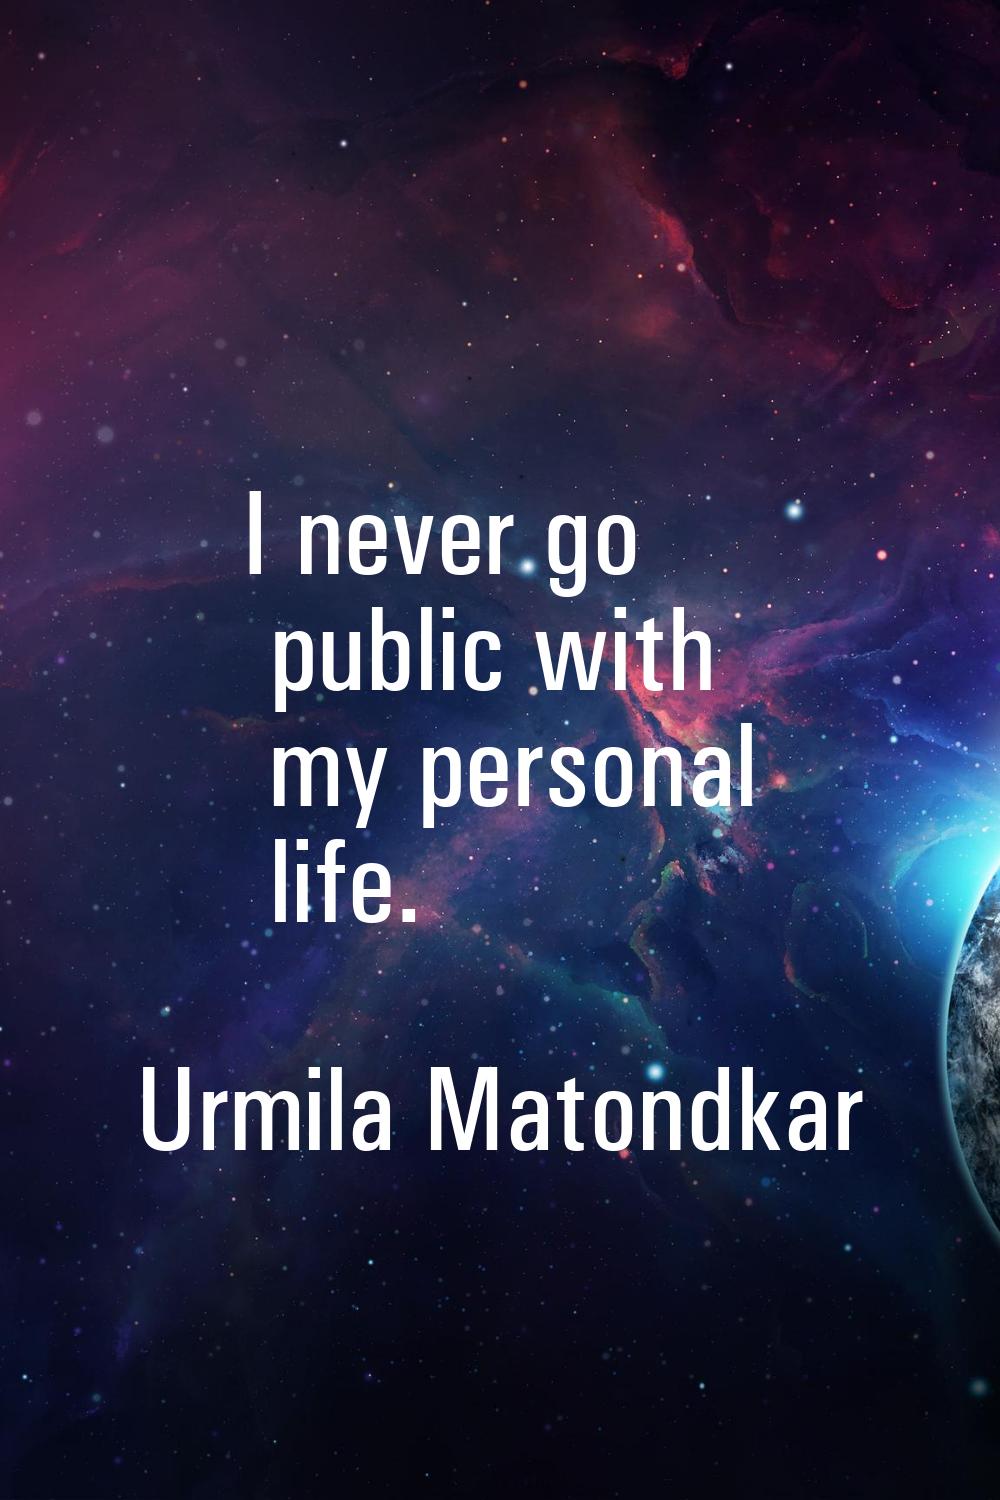 I never go public with my personal life.